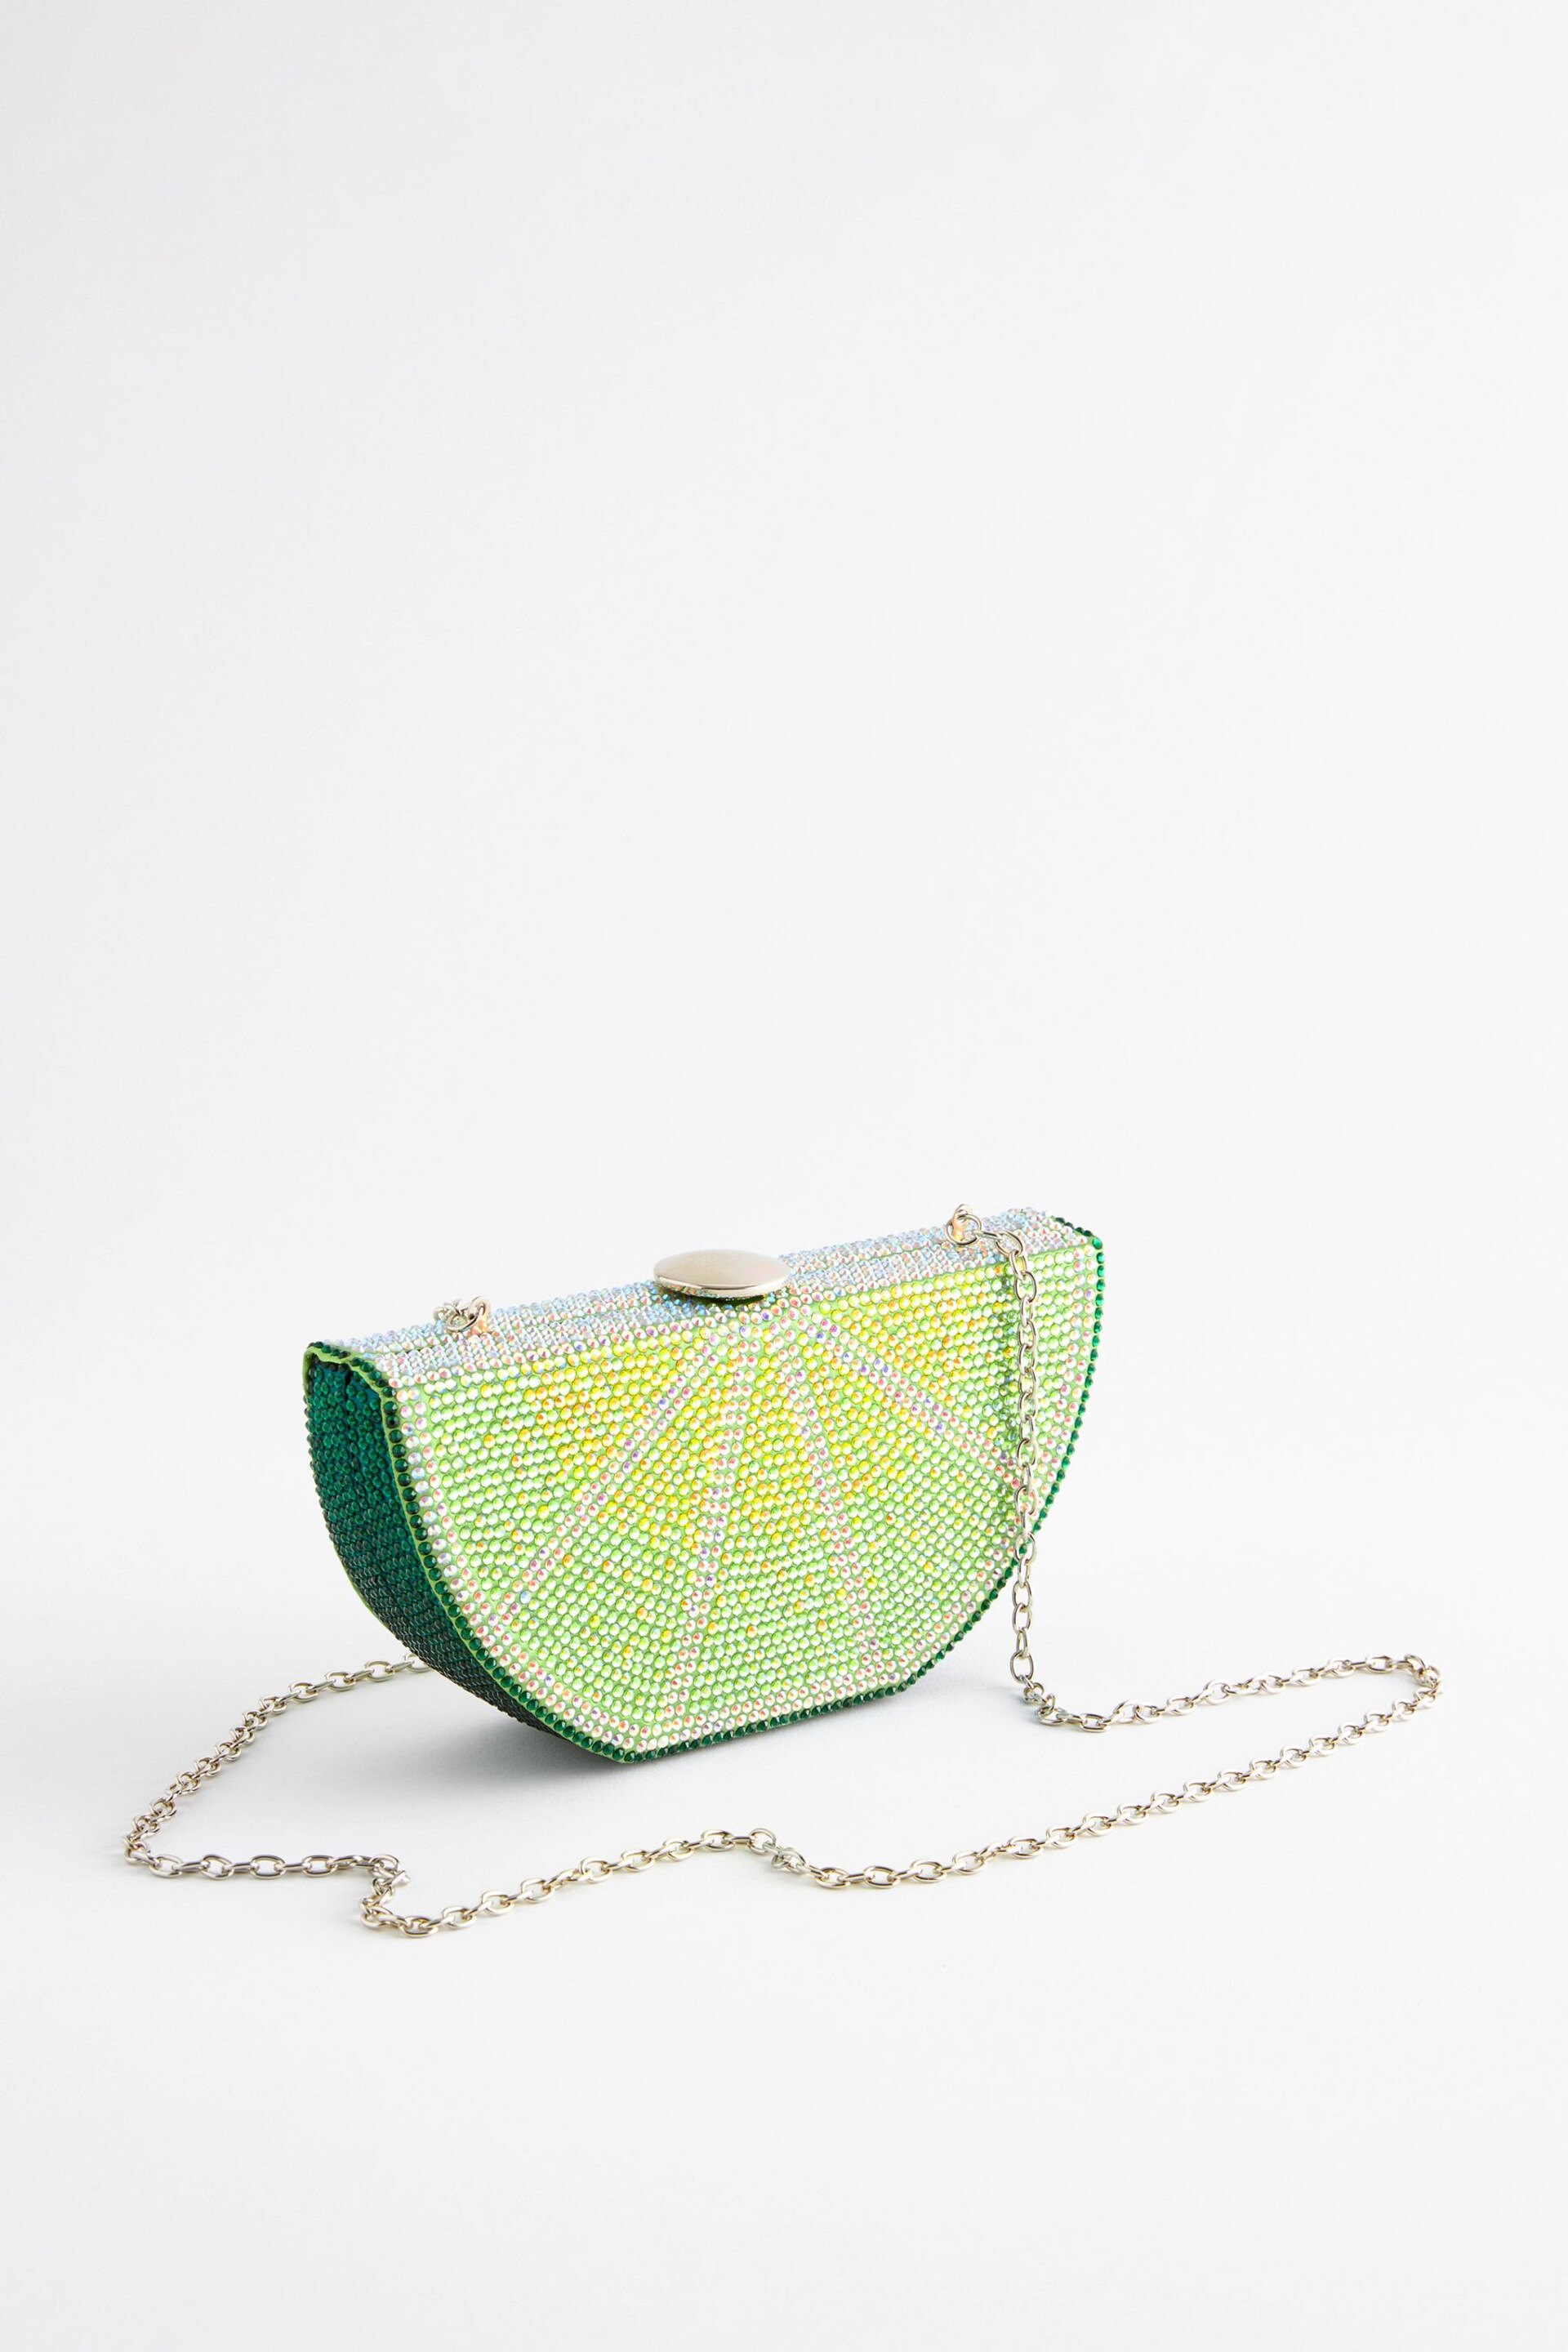 Lime Fruit Clutch - Image 1 of 5